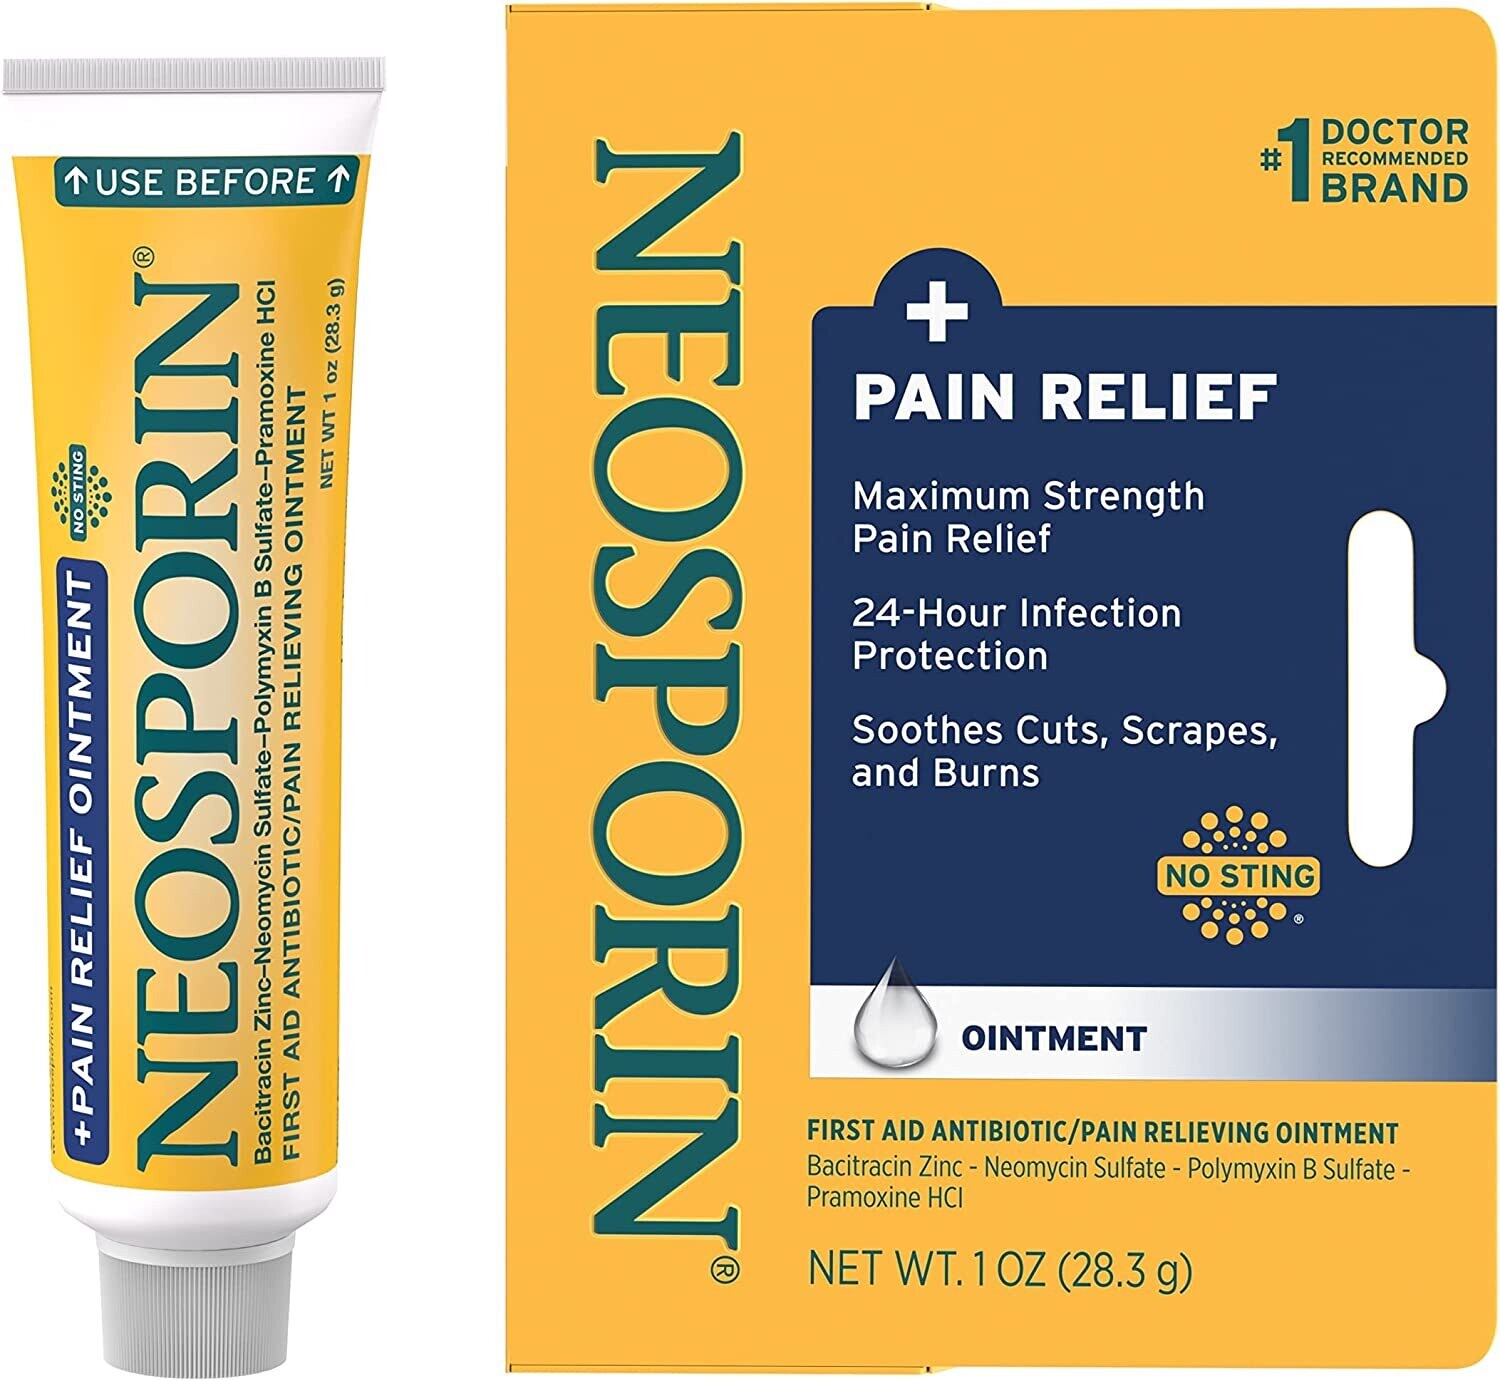 Neosporin - Maximum-Strength Pain Relief Dual Action Ointment Antibiotic & Analgesic [1 OUNCE]